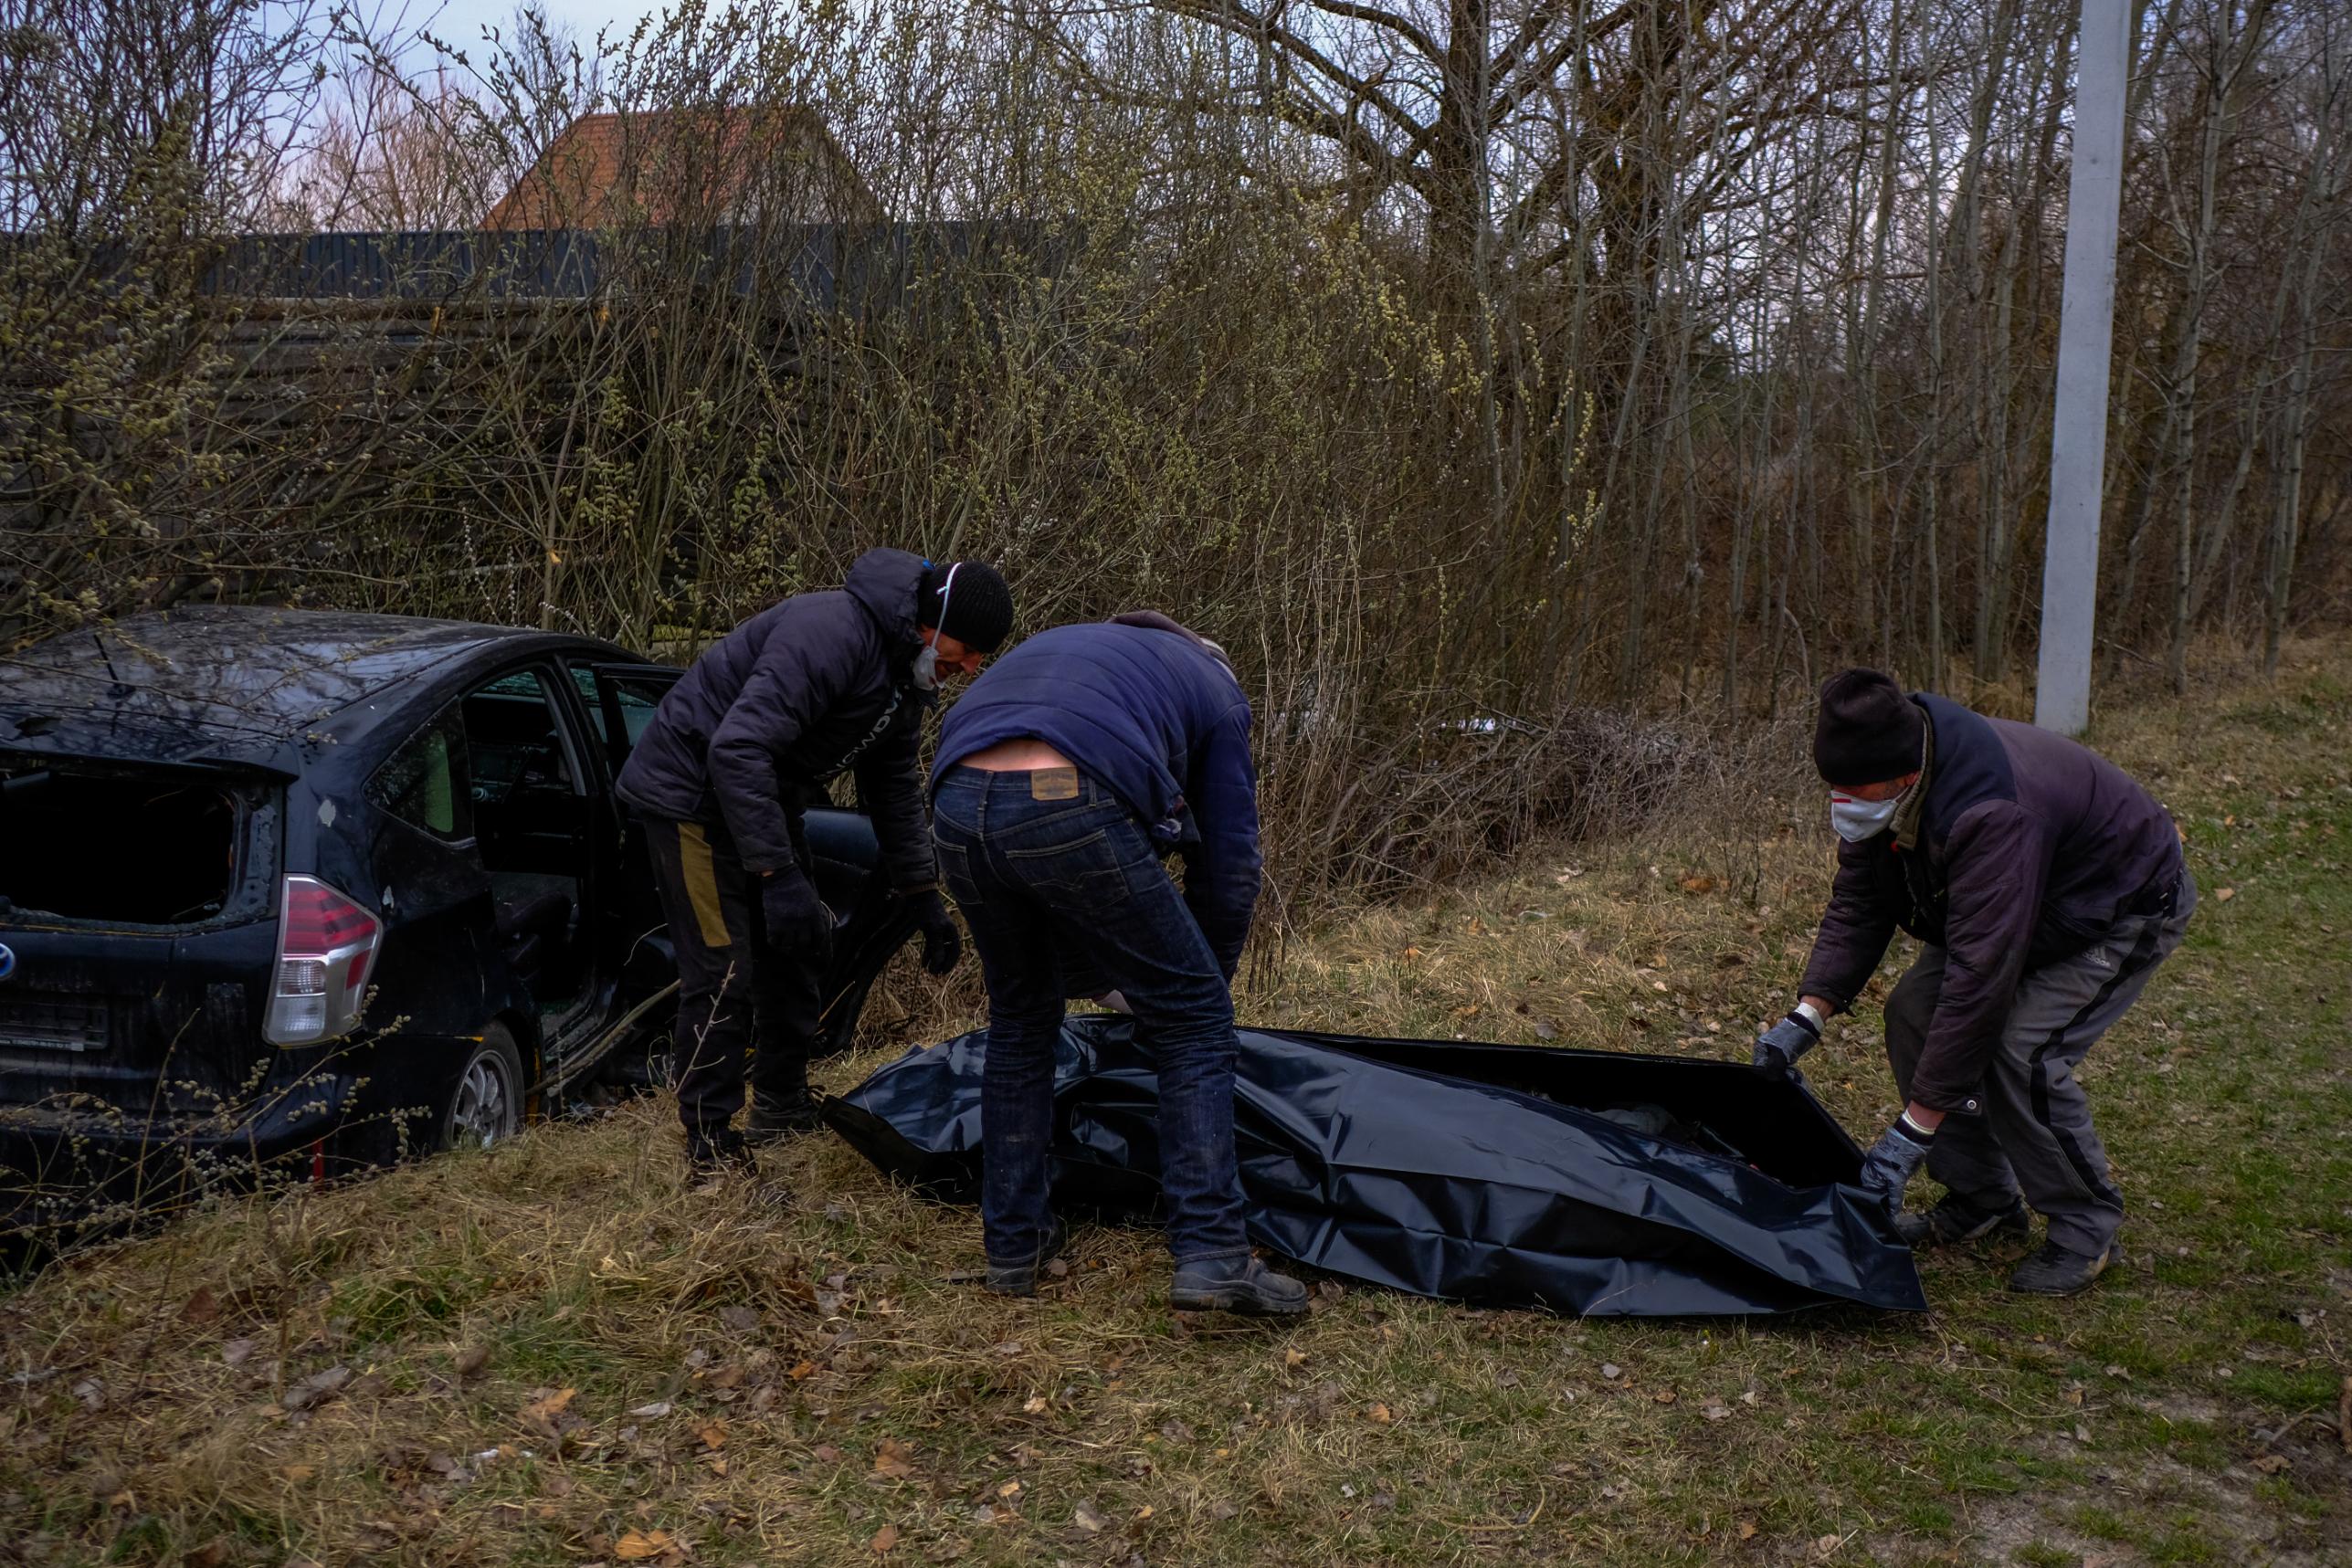 Volunteers collect the body of a man who was shot while driving his car in Borodianka, Ukraine.